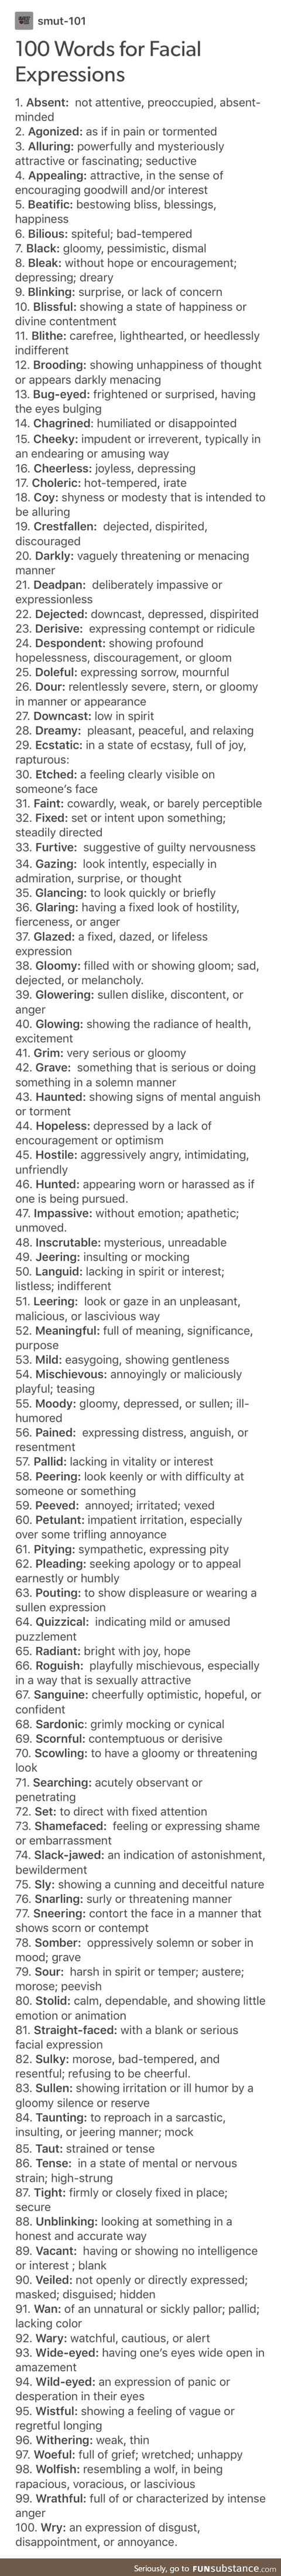 100 words for facial expressions